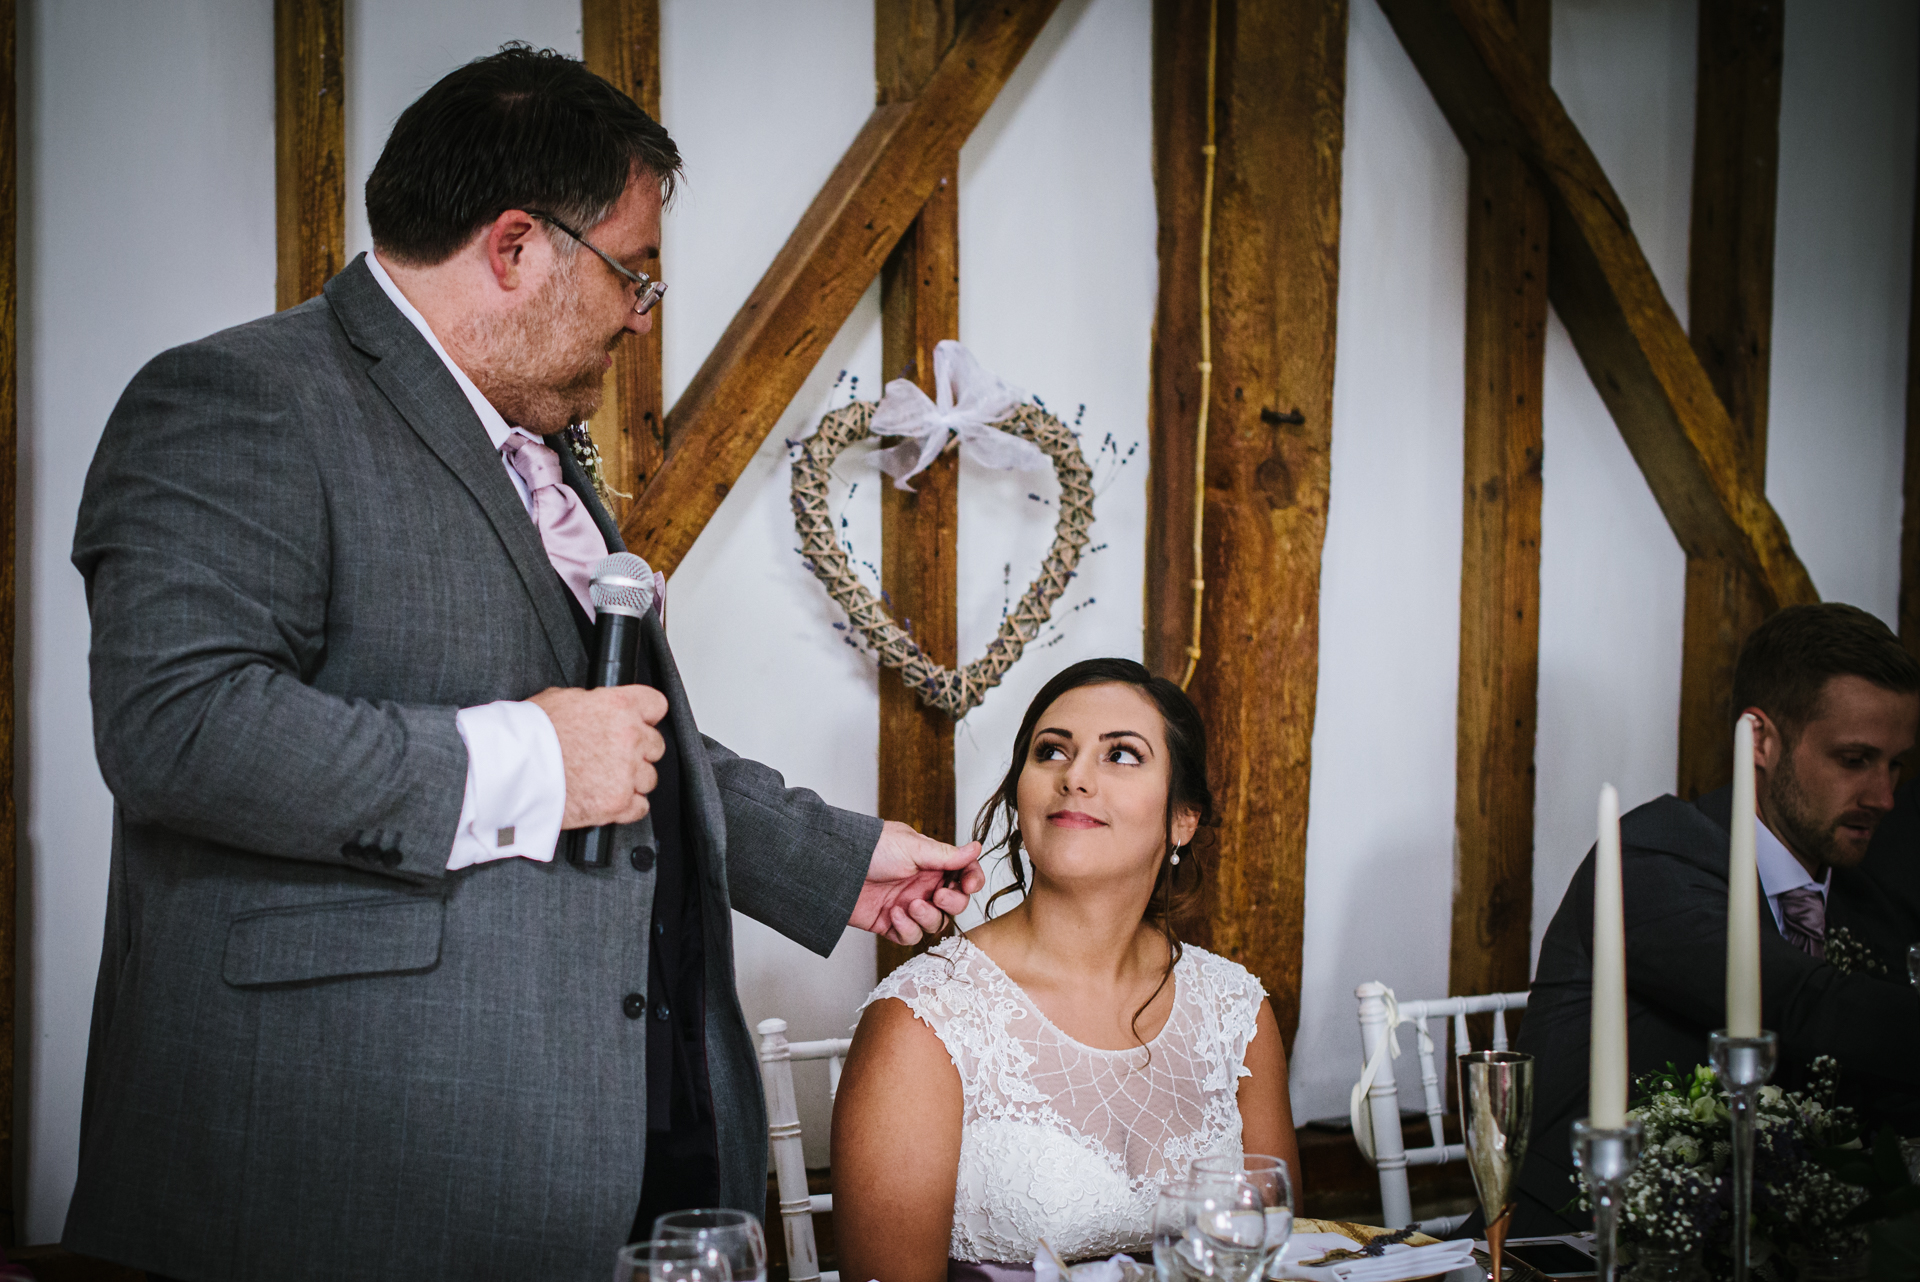 Bride looks emotional as her fathers gives his wedding speech